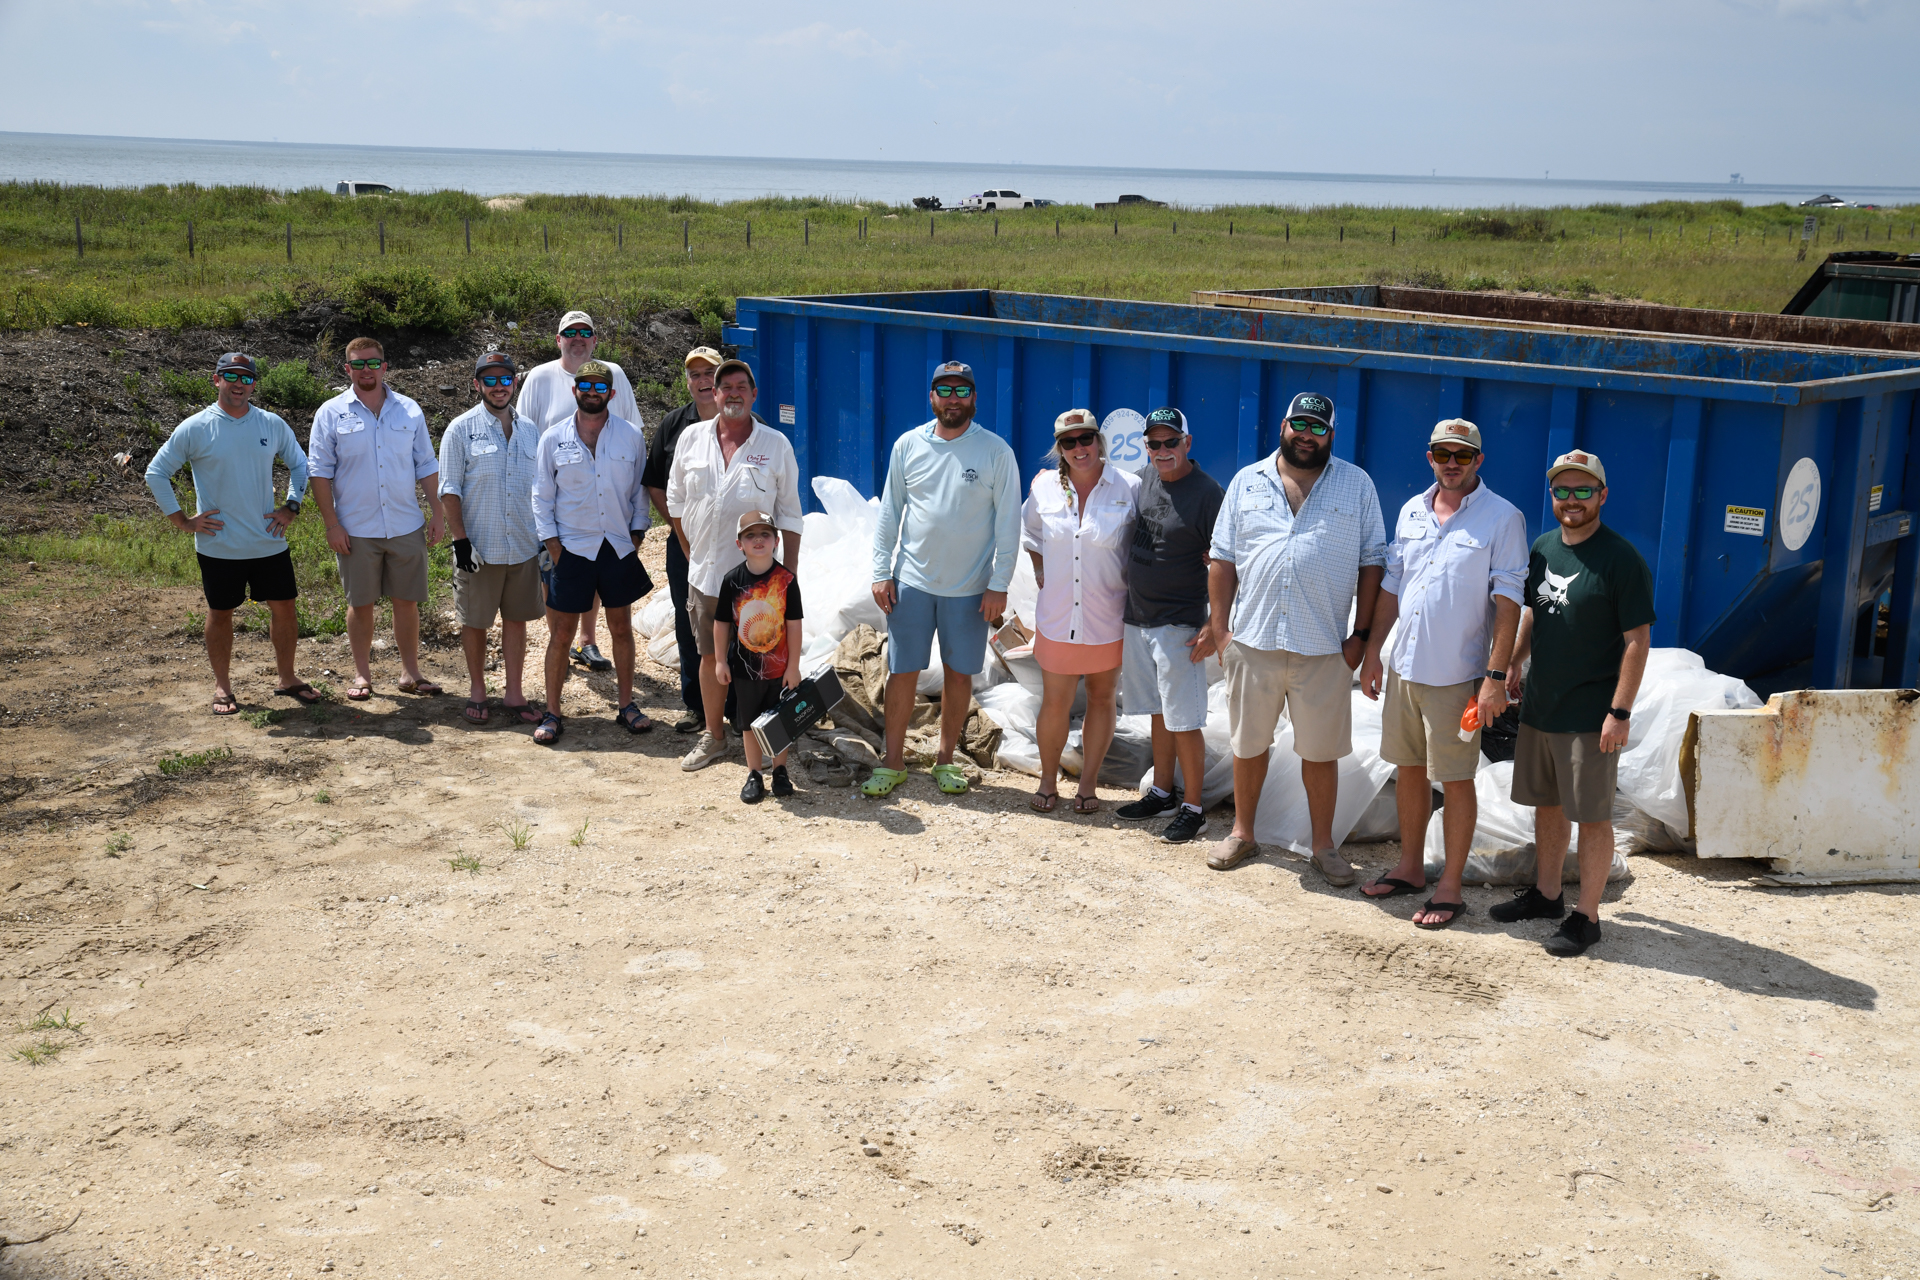 CONSERVATION IN ACTION: The Second Annual CCA McFaddin Beach Clean Up